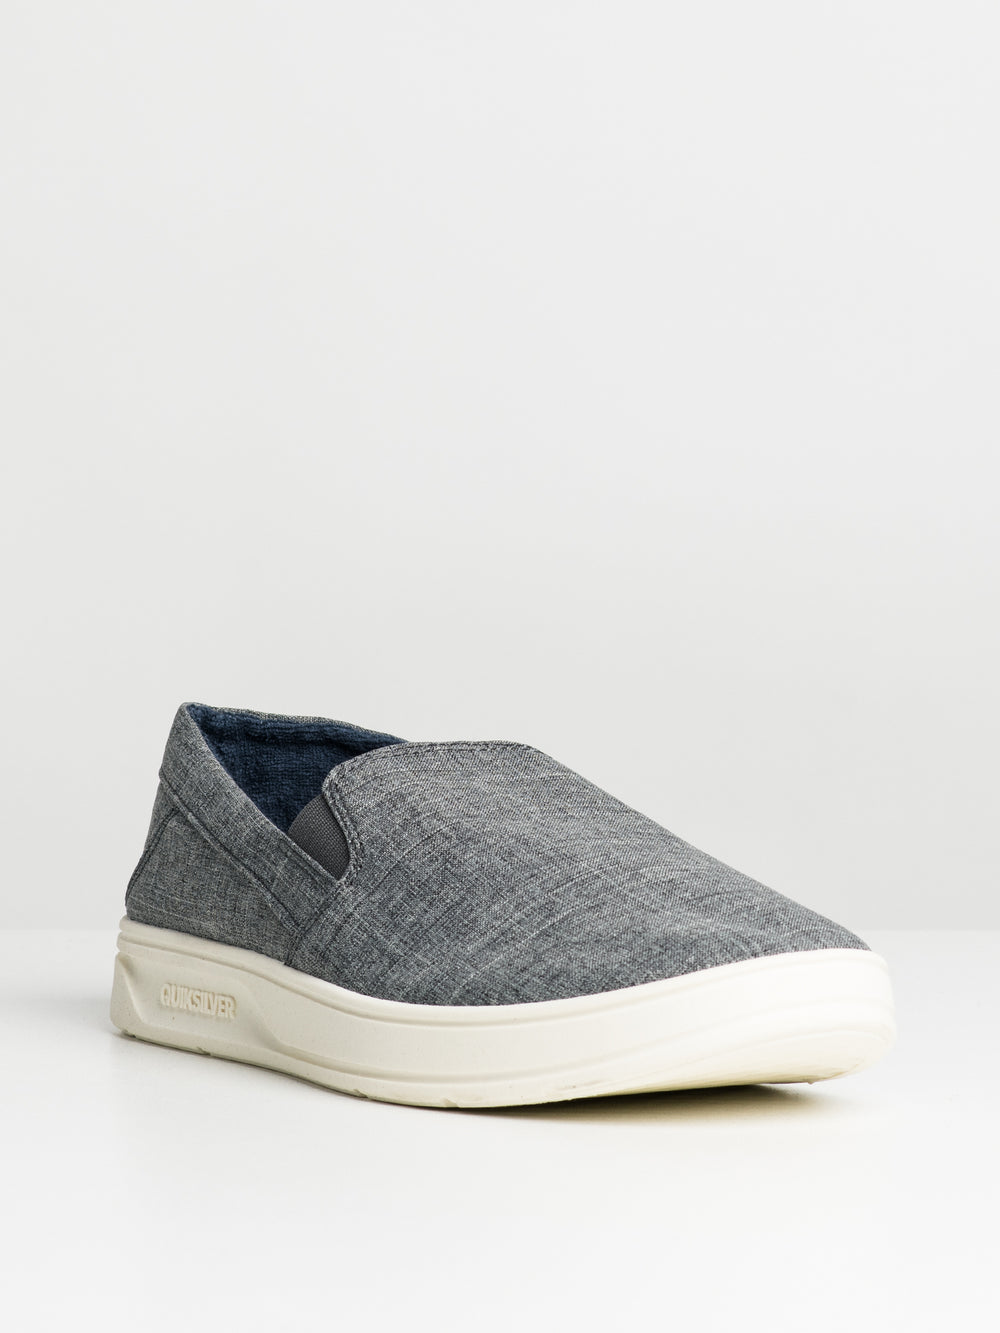 MENS QUIKSILVER HARBOR WHARF SLIP ON  - CLEARANCE